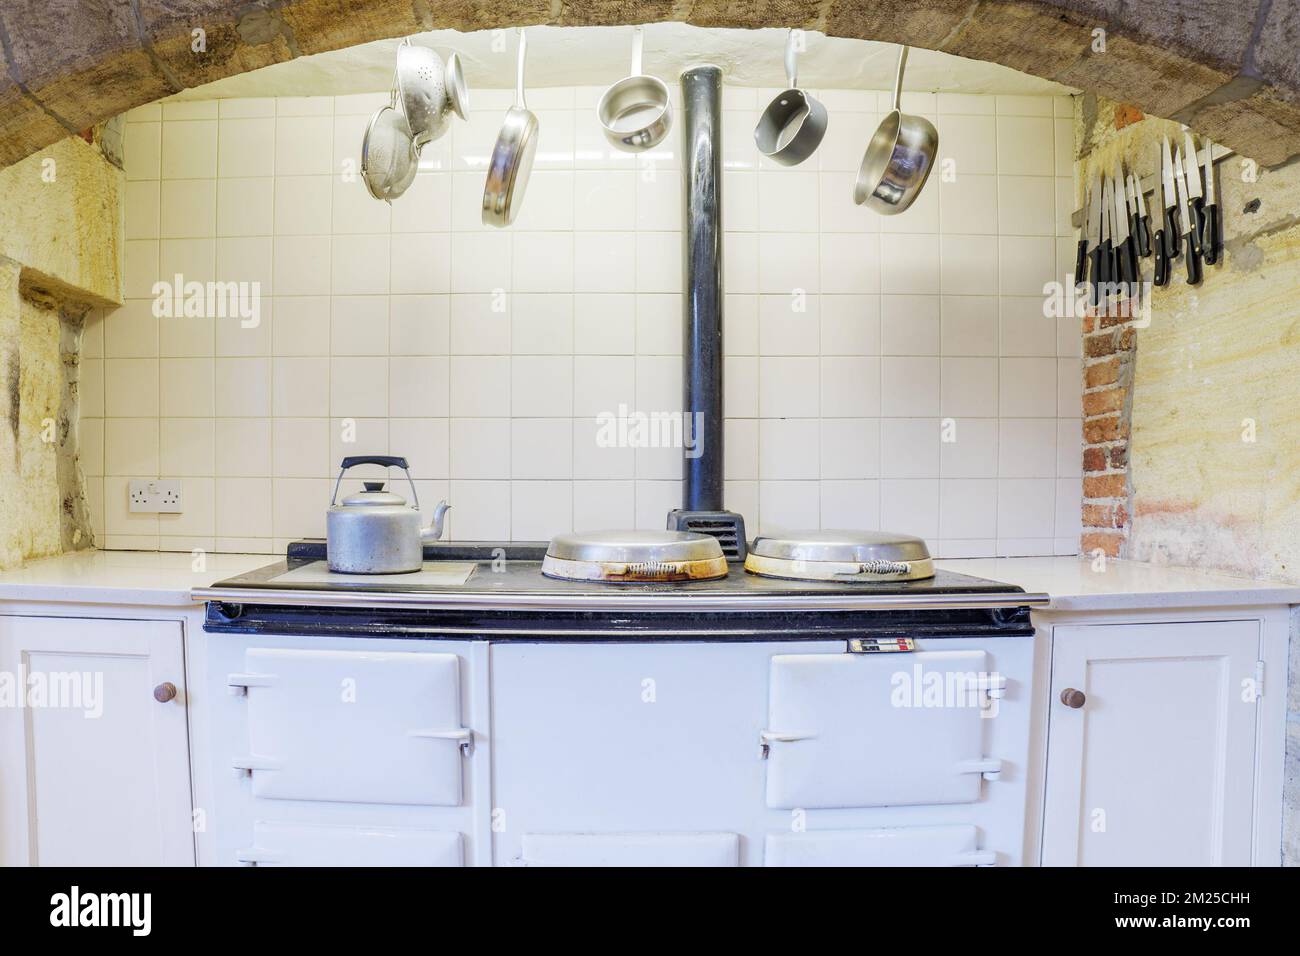 Country farmhouse kitchen with cast iron oven and hanging pans. Stock Photo